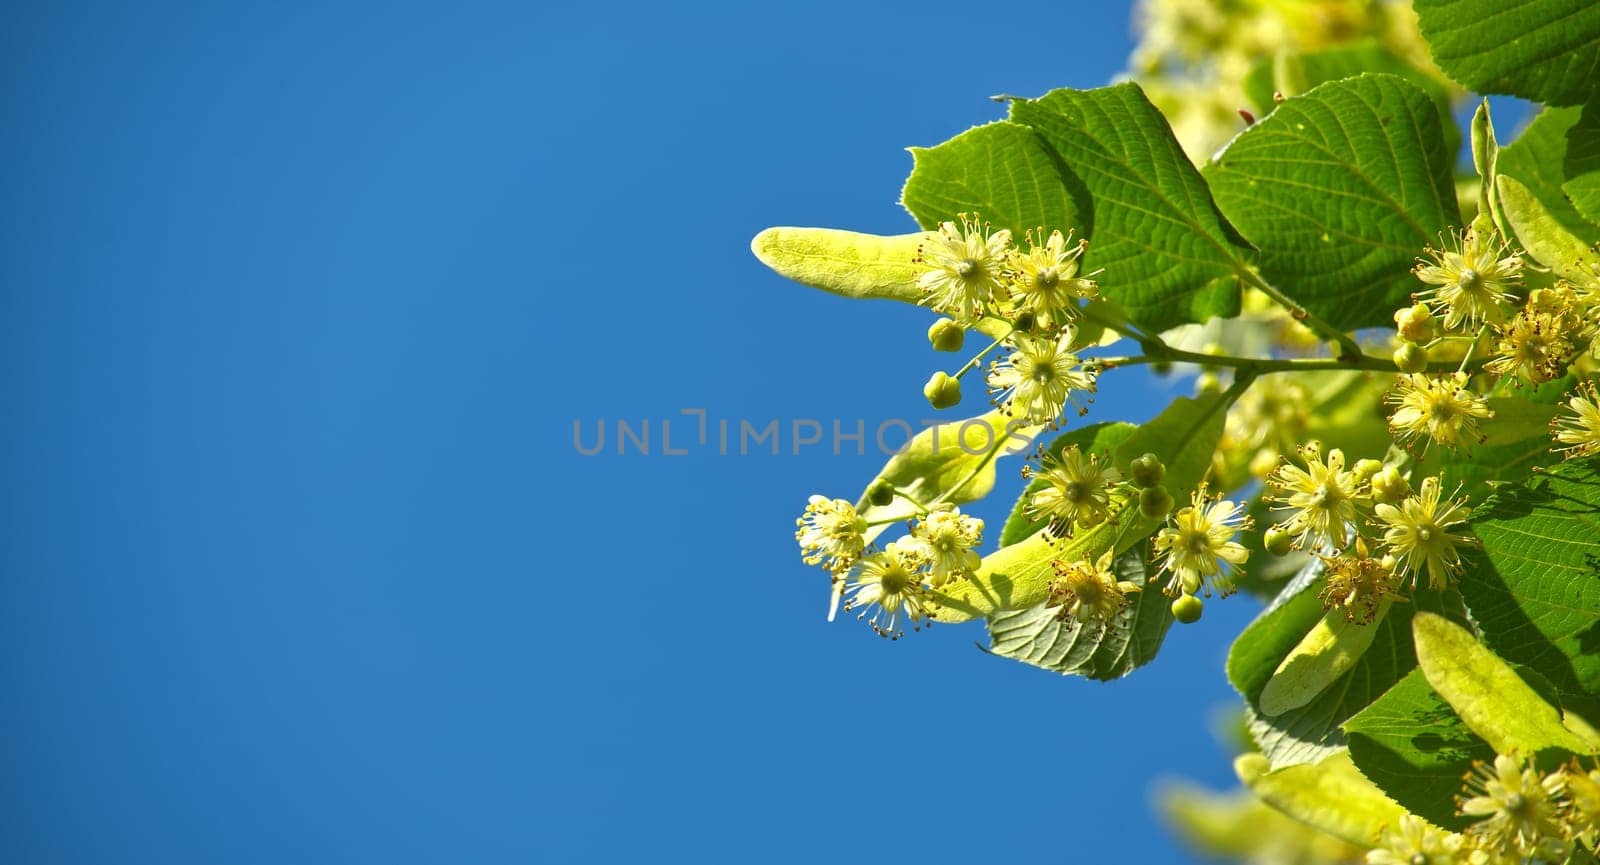 Linden tree branch with yellow flowers against blue sky by NetPix